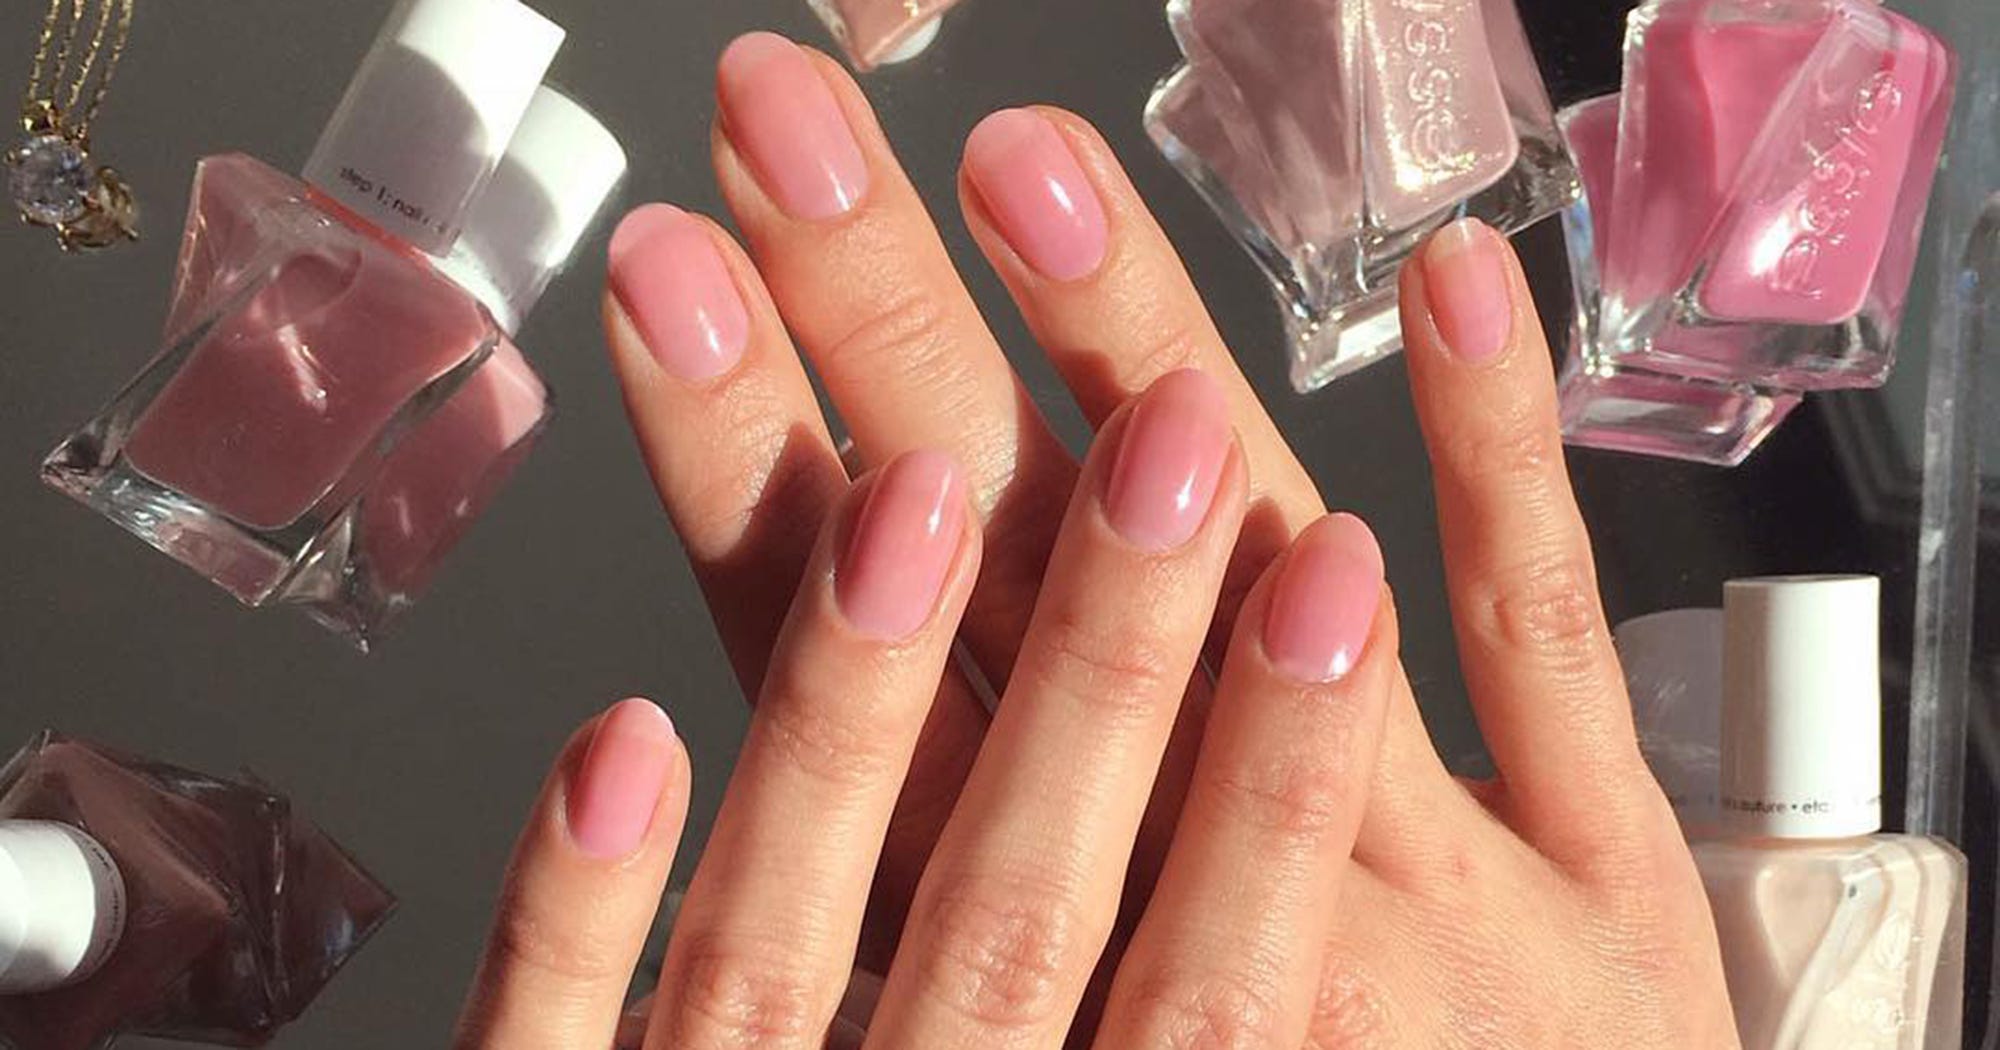 5. "Elegant Nail Polish Shades for Women in Their 50s" - wide 2